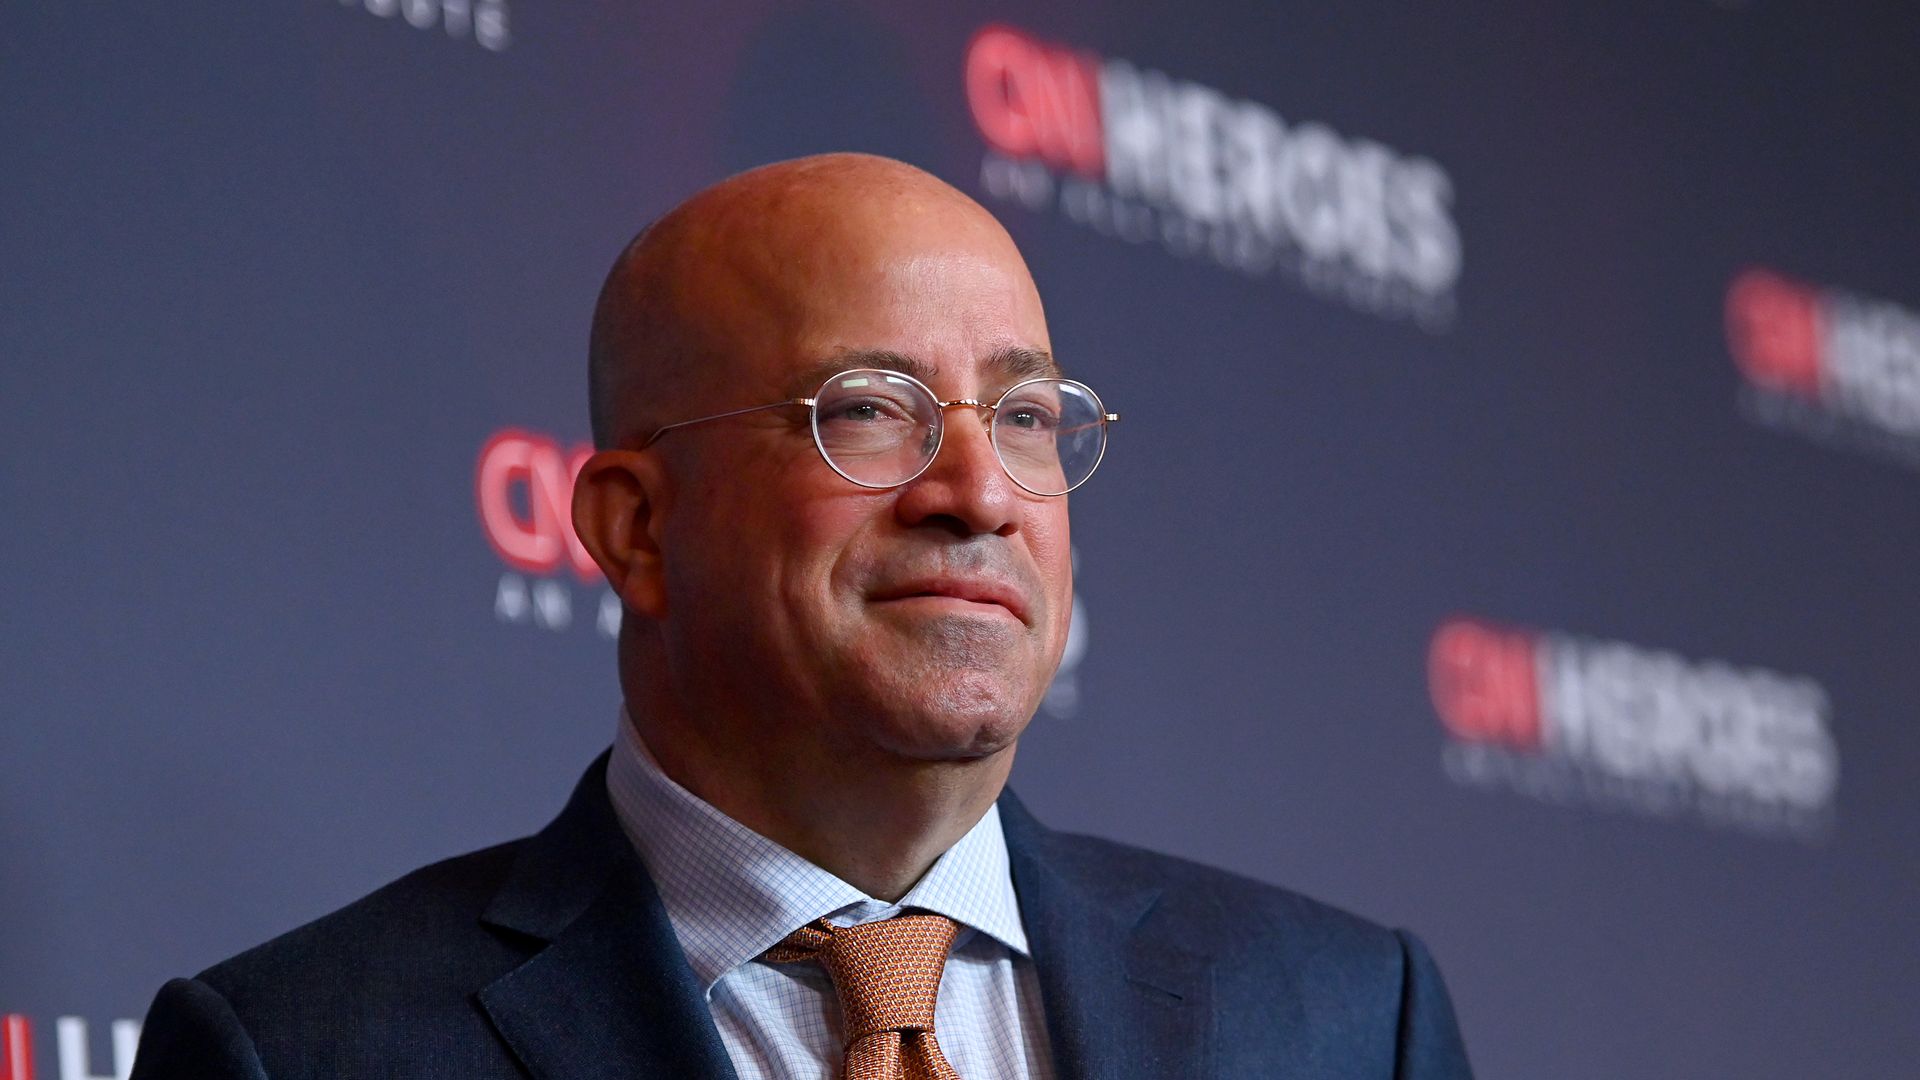 Jeff Zucker attends CNN Heroes at American Museum of Natural History on December 08, 2019 in New York City.